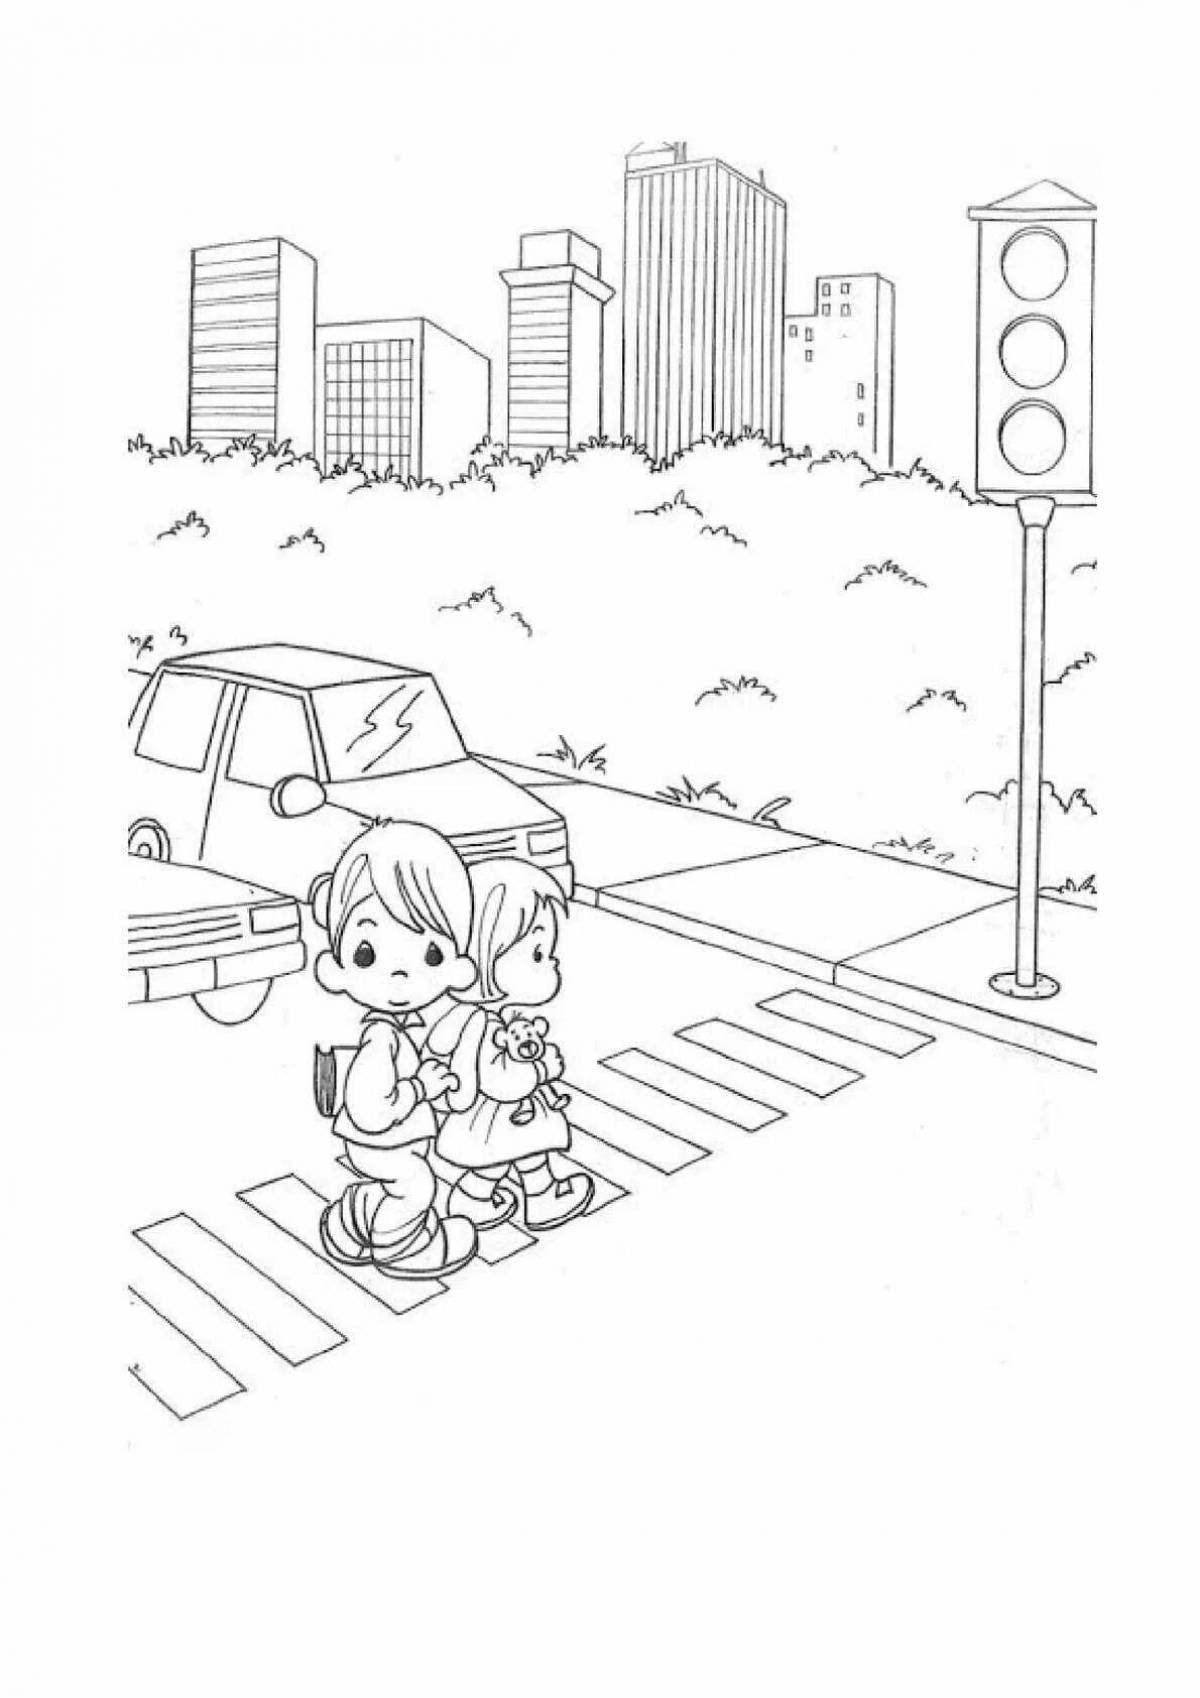 Color-frenzy coloring page drawings of my dad and me for safer roads